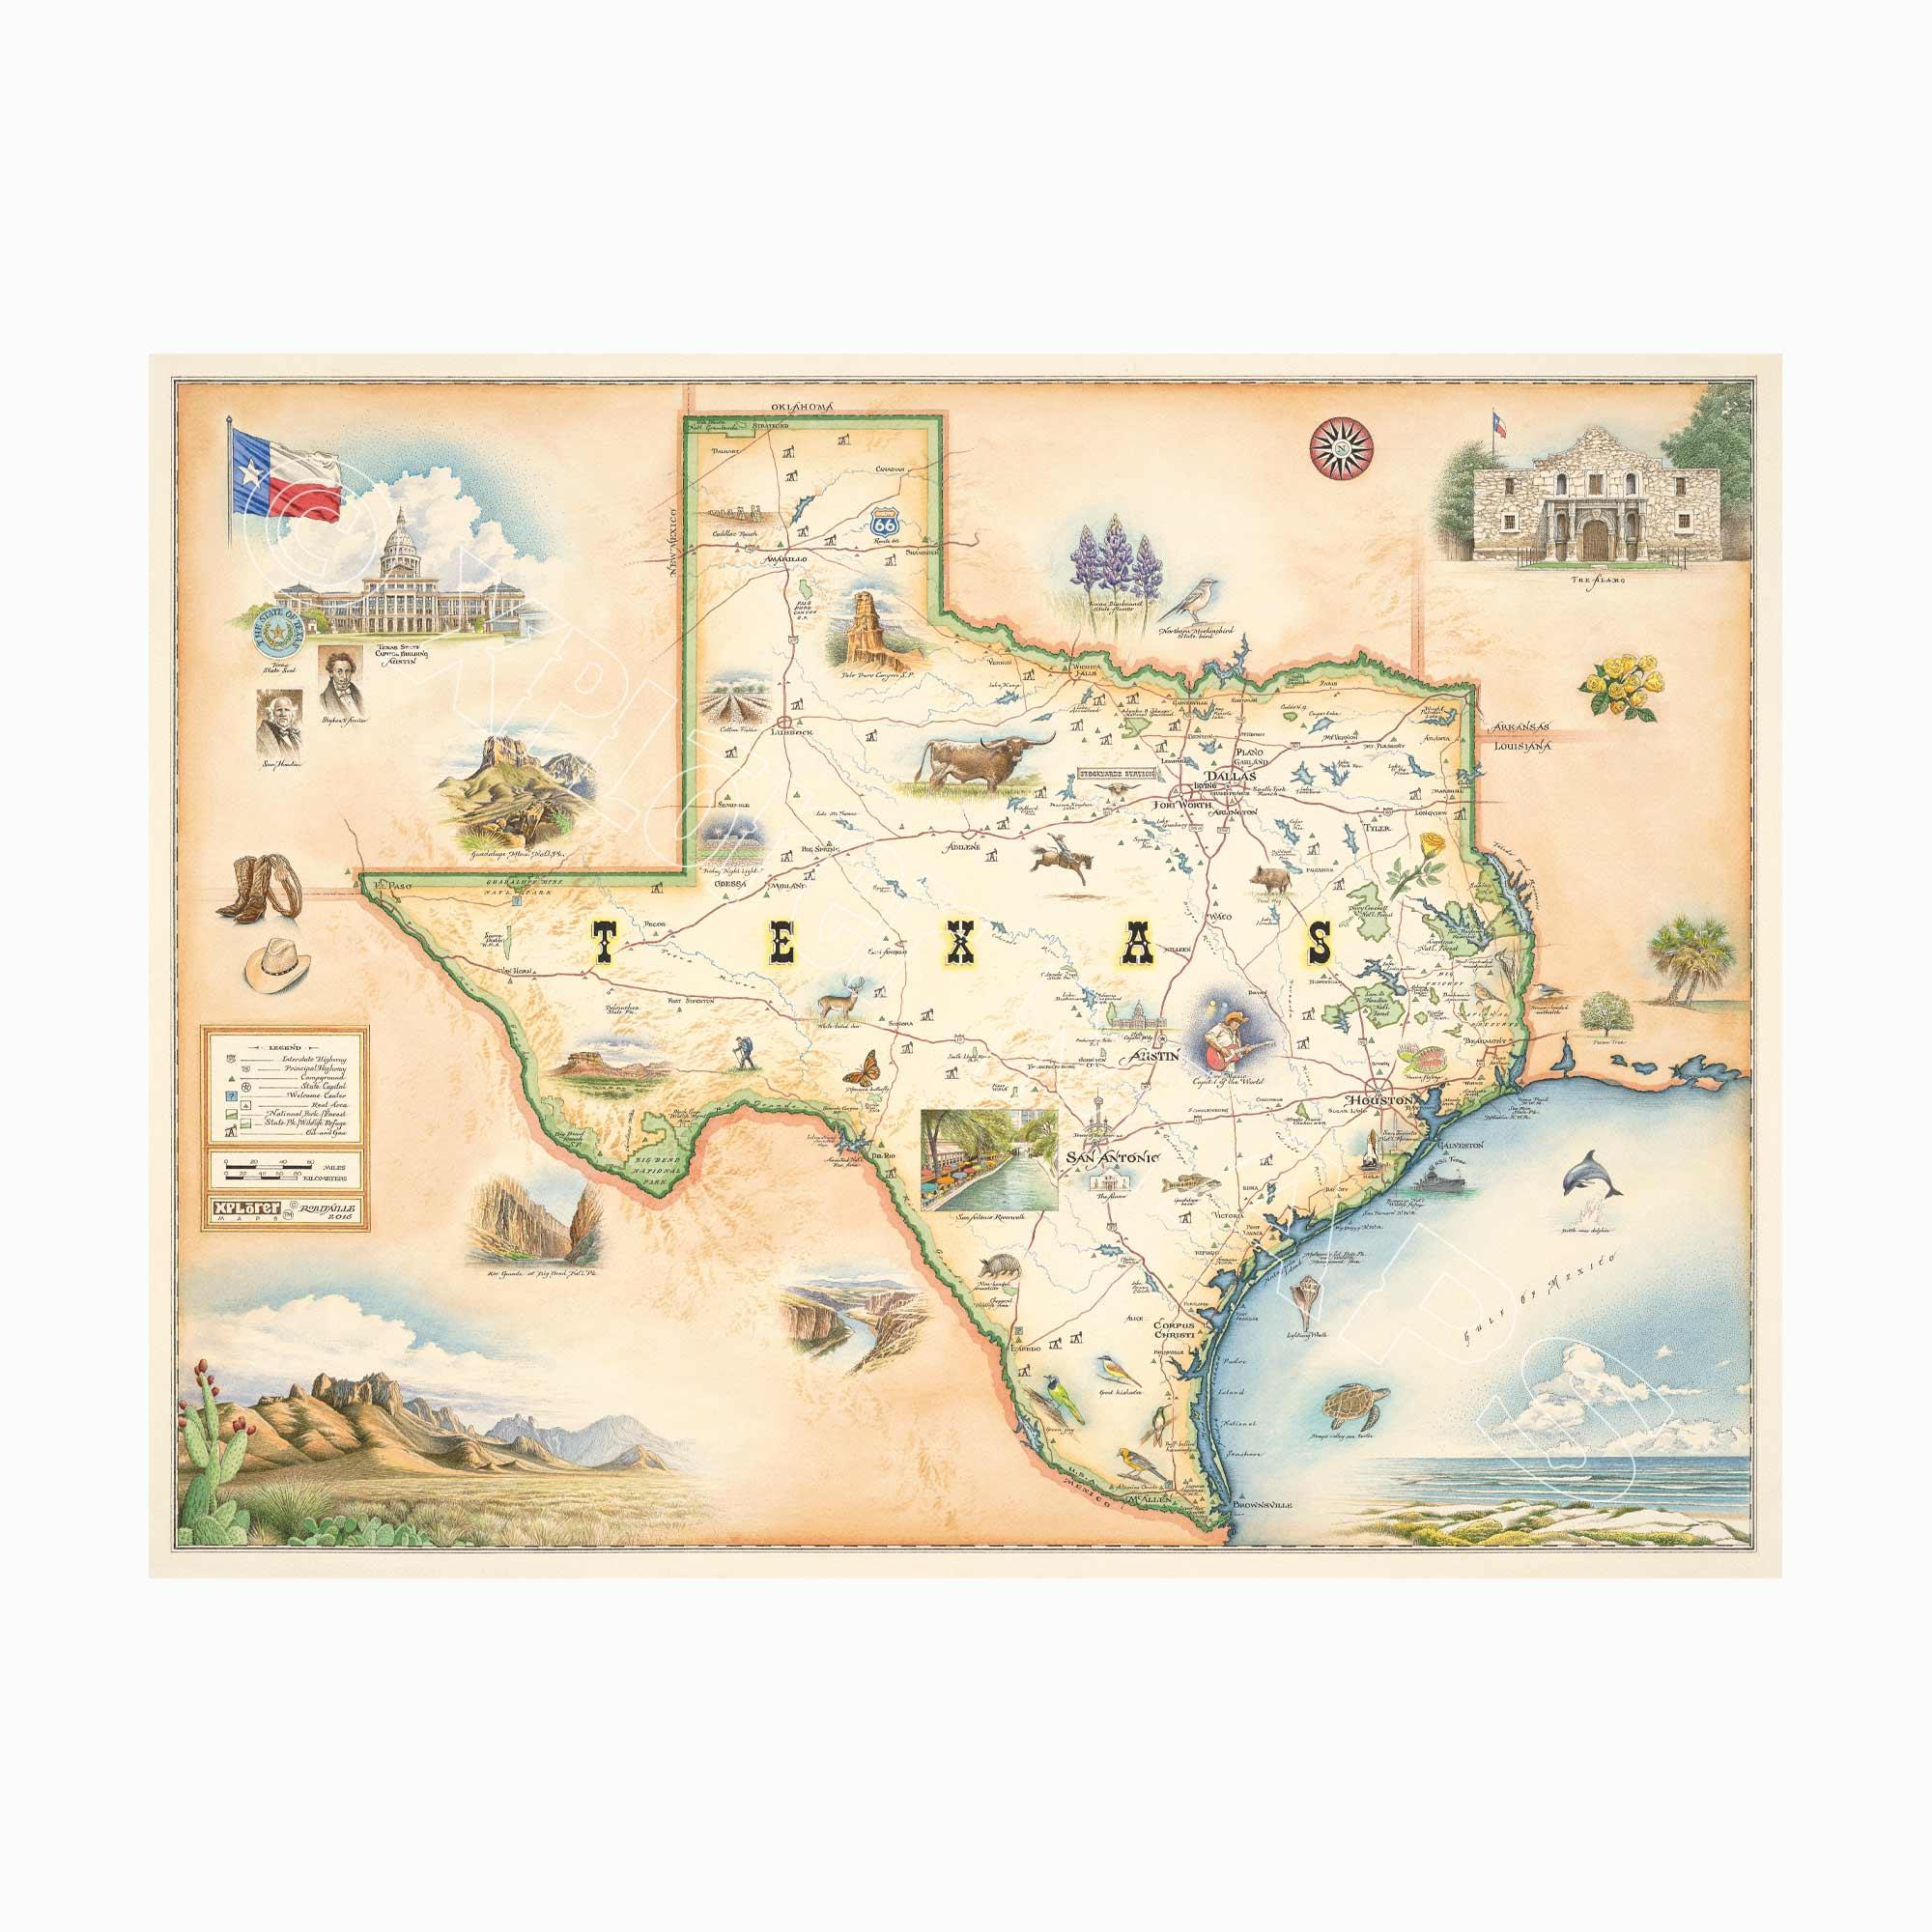 Texas state hand-drawn map in earth tones brown and beige. The map features illustrations of places such as the Alamo, San Antonio Riverwalk, and Guadalupe National Park. Flora and fauna include venus flytrap, longhorns, Monarch butterfly, and armadillo. Measures 24x18.